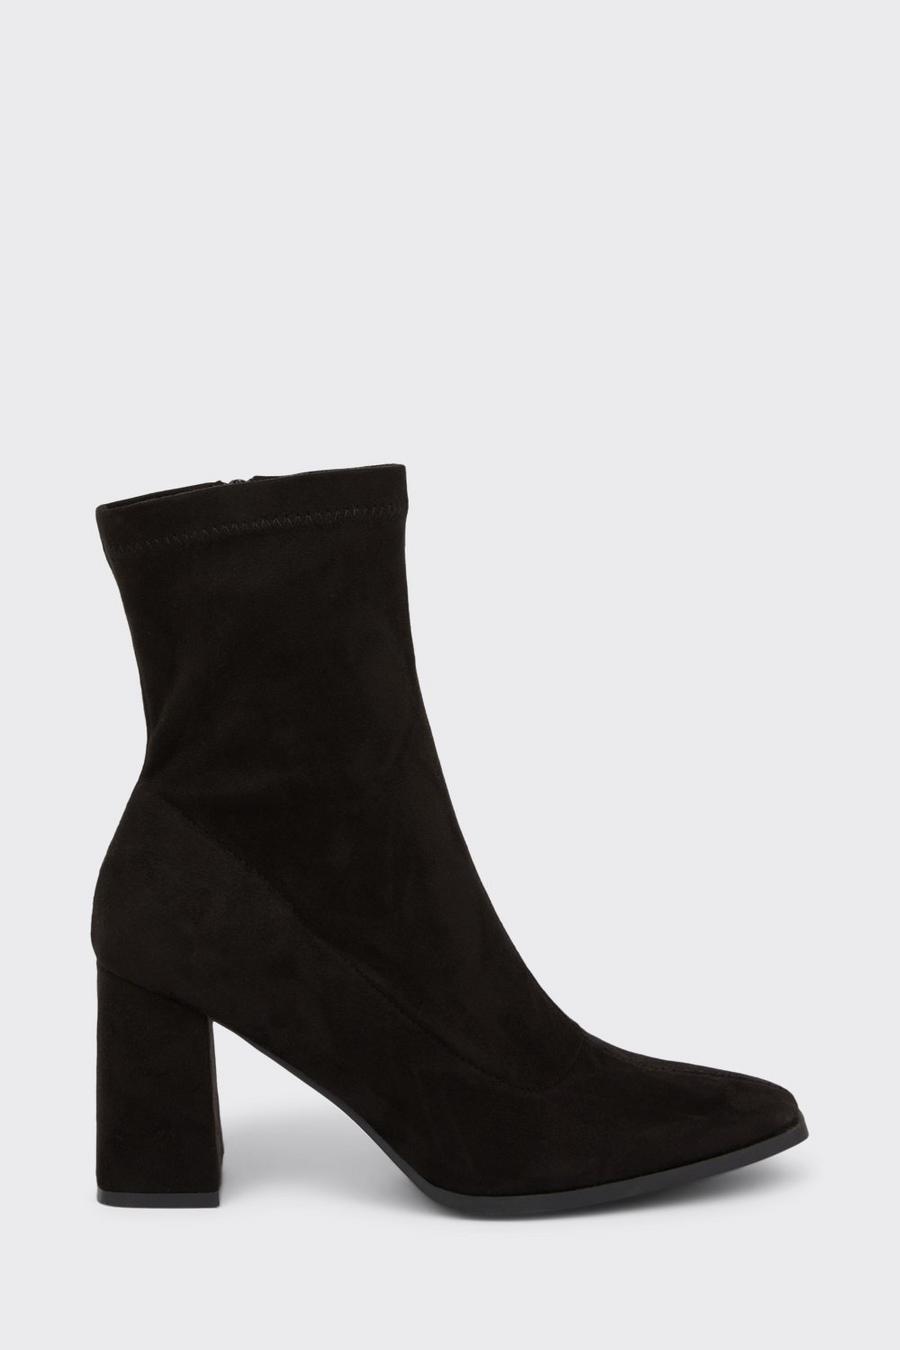 Monaco Stretch Heeled Ankle Boots